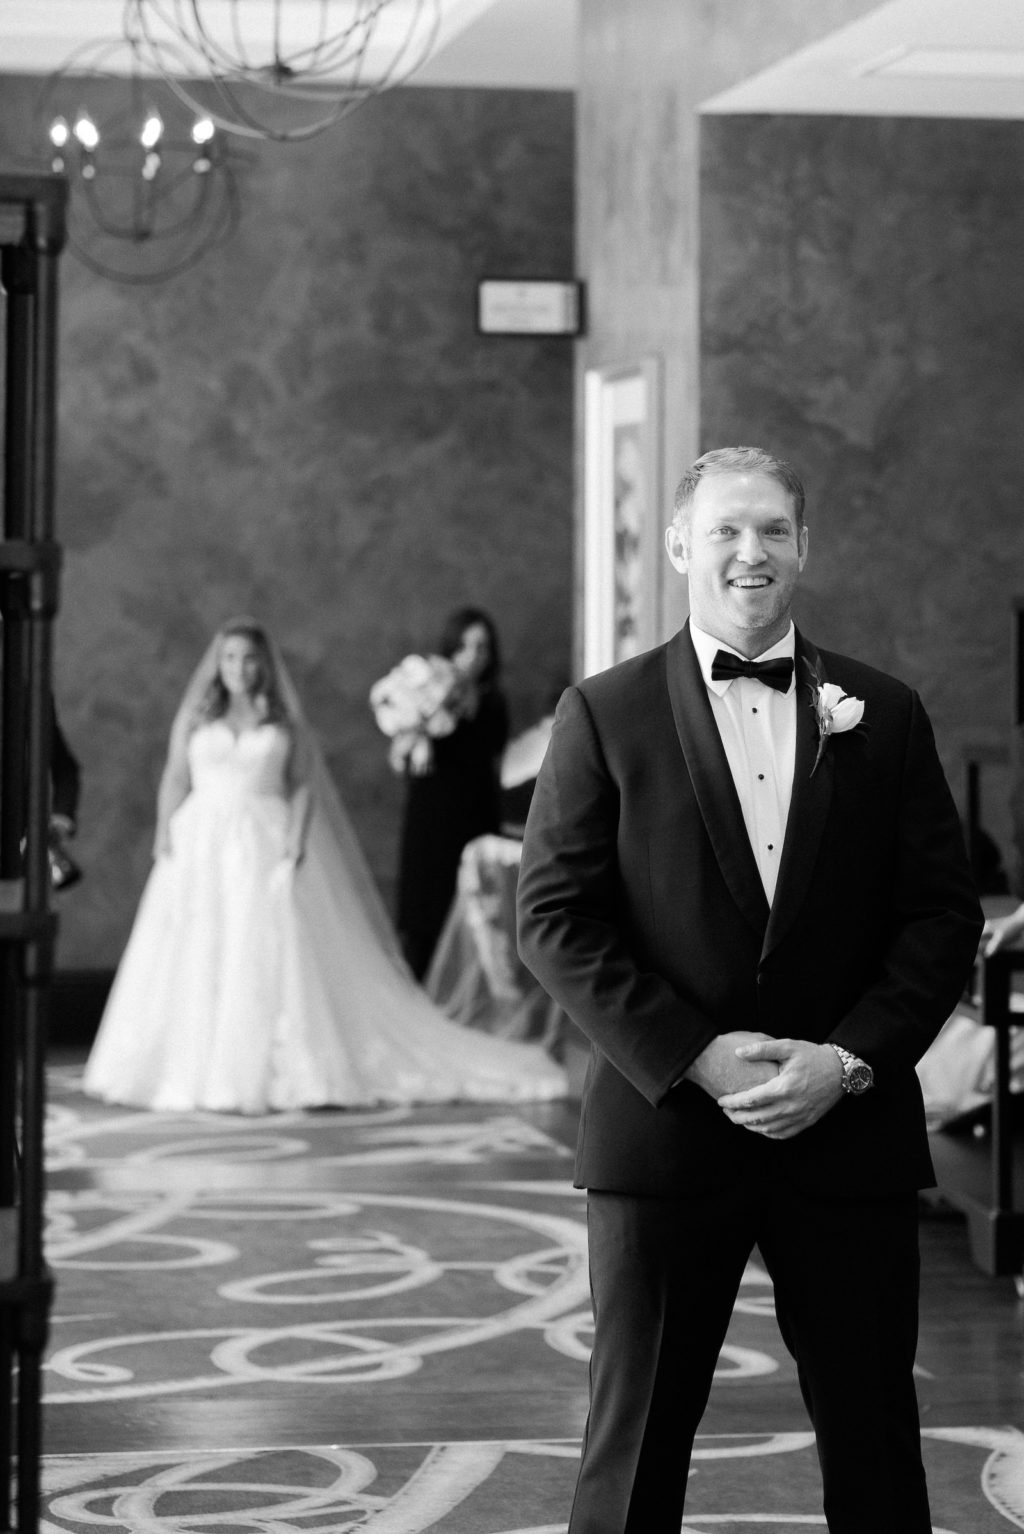 Tampa Bay Bride and Groom in Classic Black Tuxedo First Look Wedding Photo